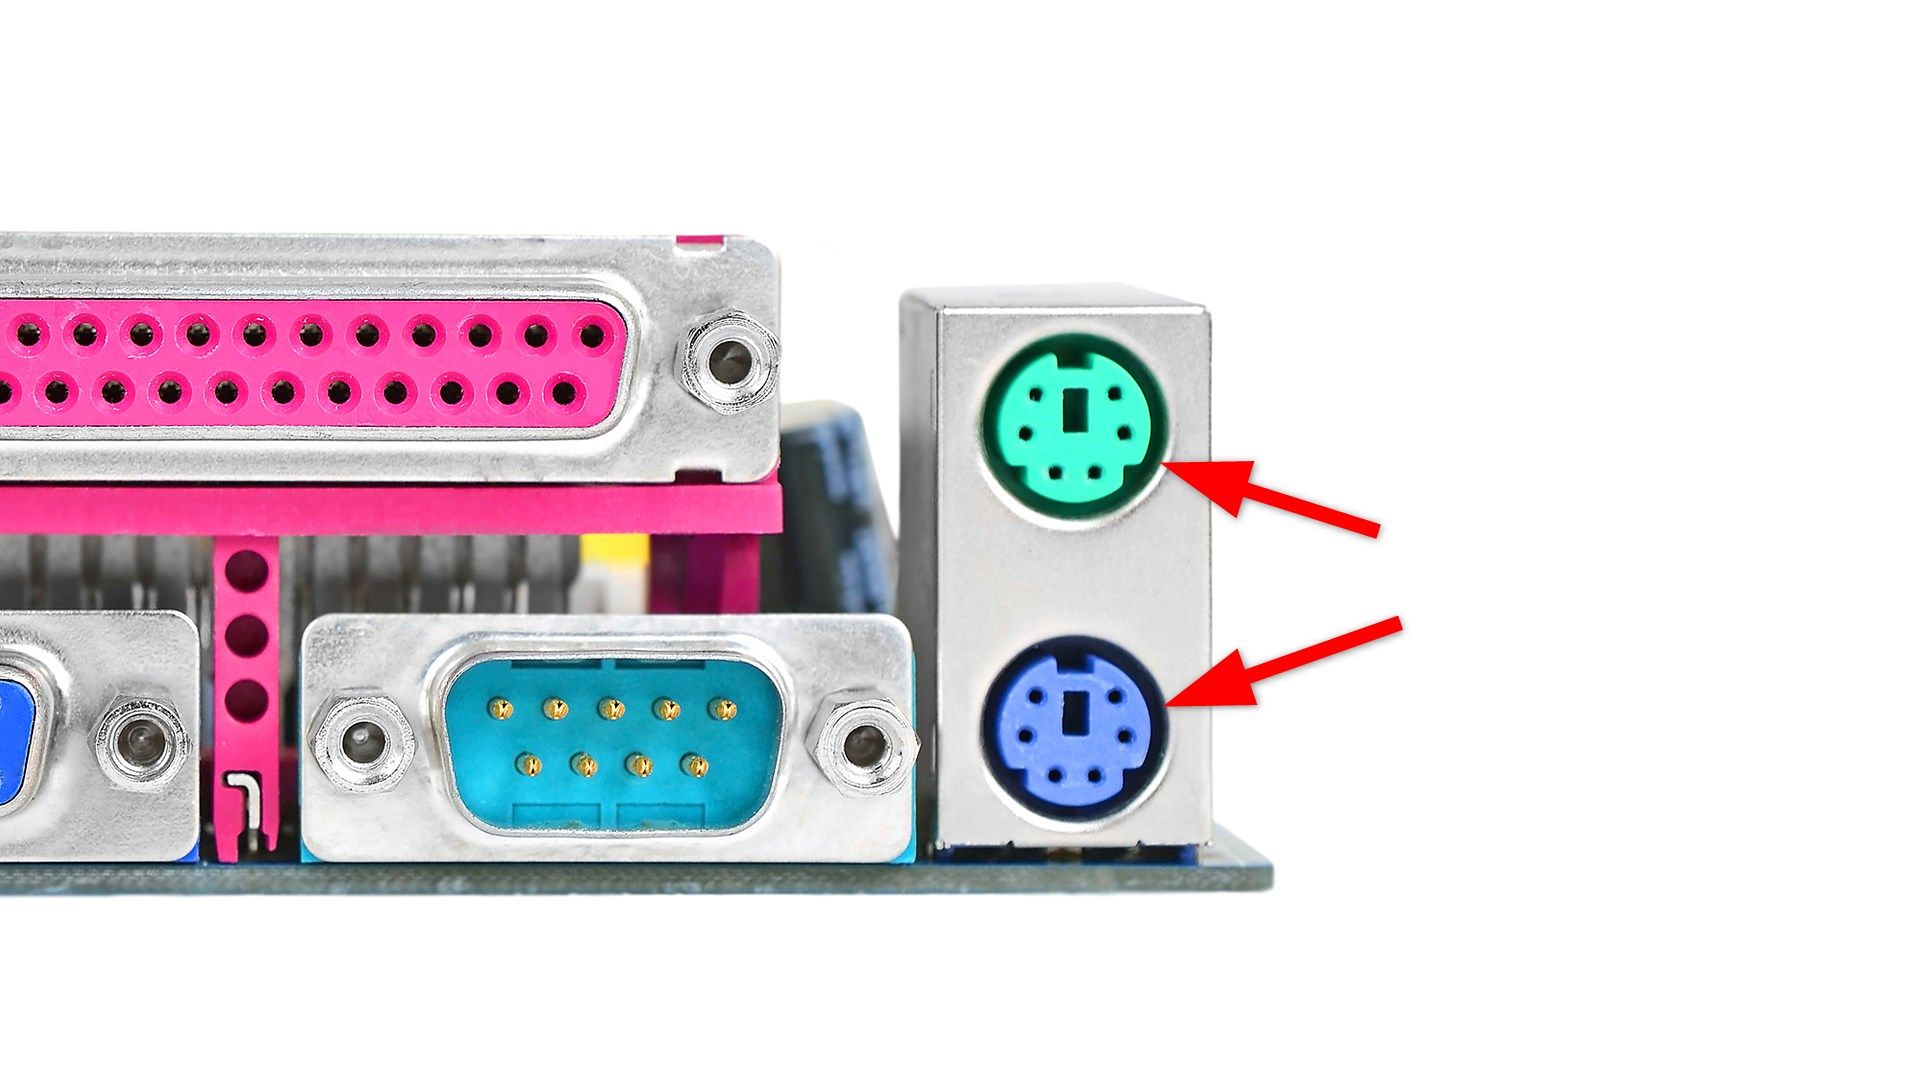 The all you need to know about all computer ports and connectors